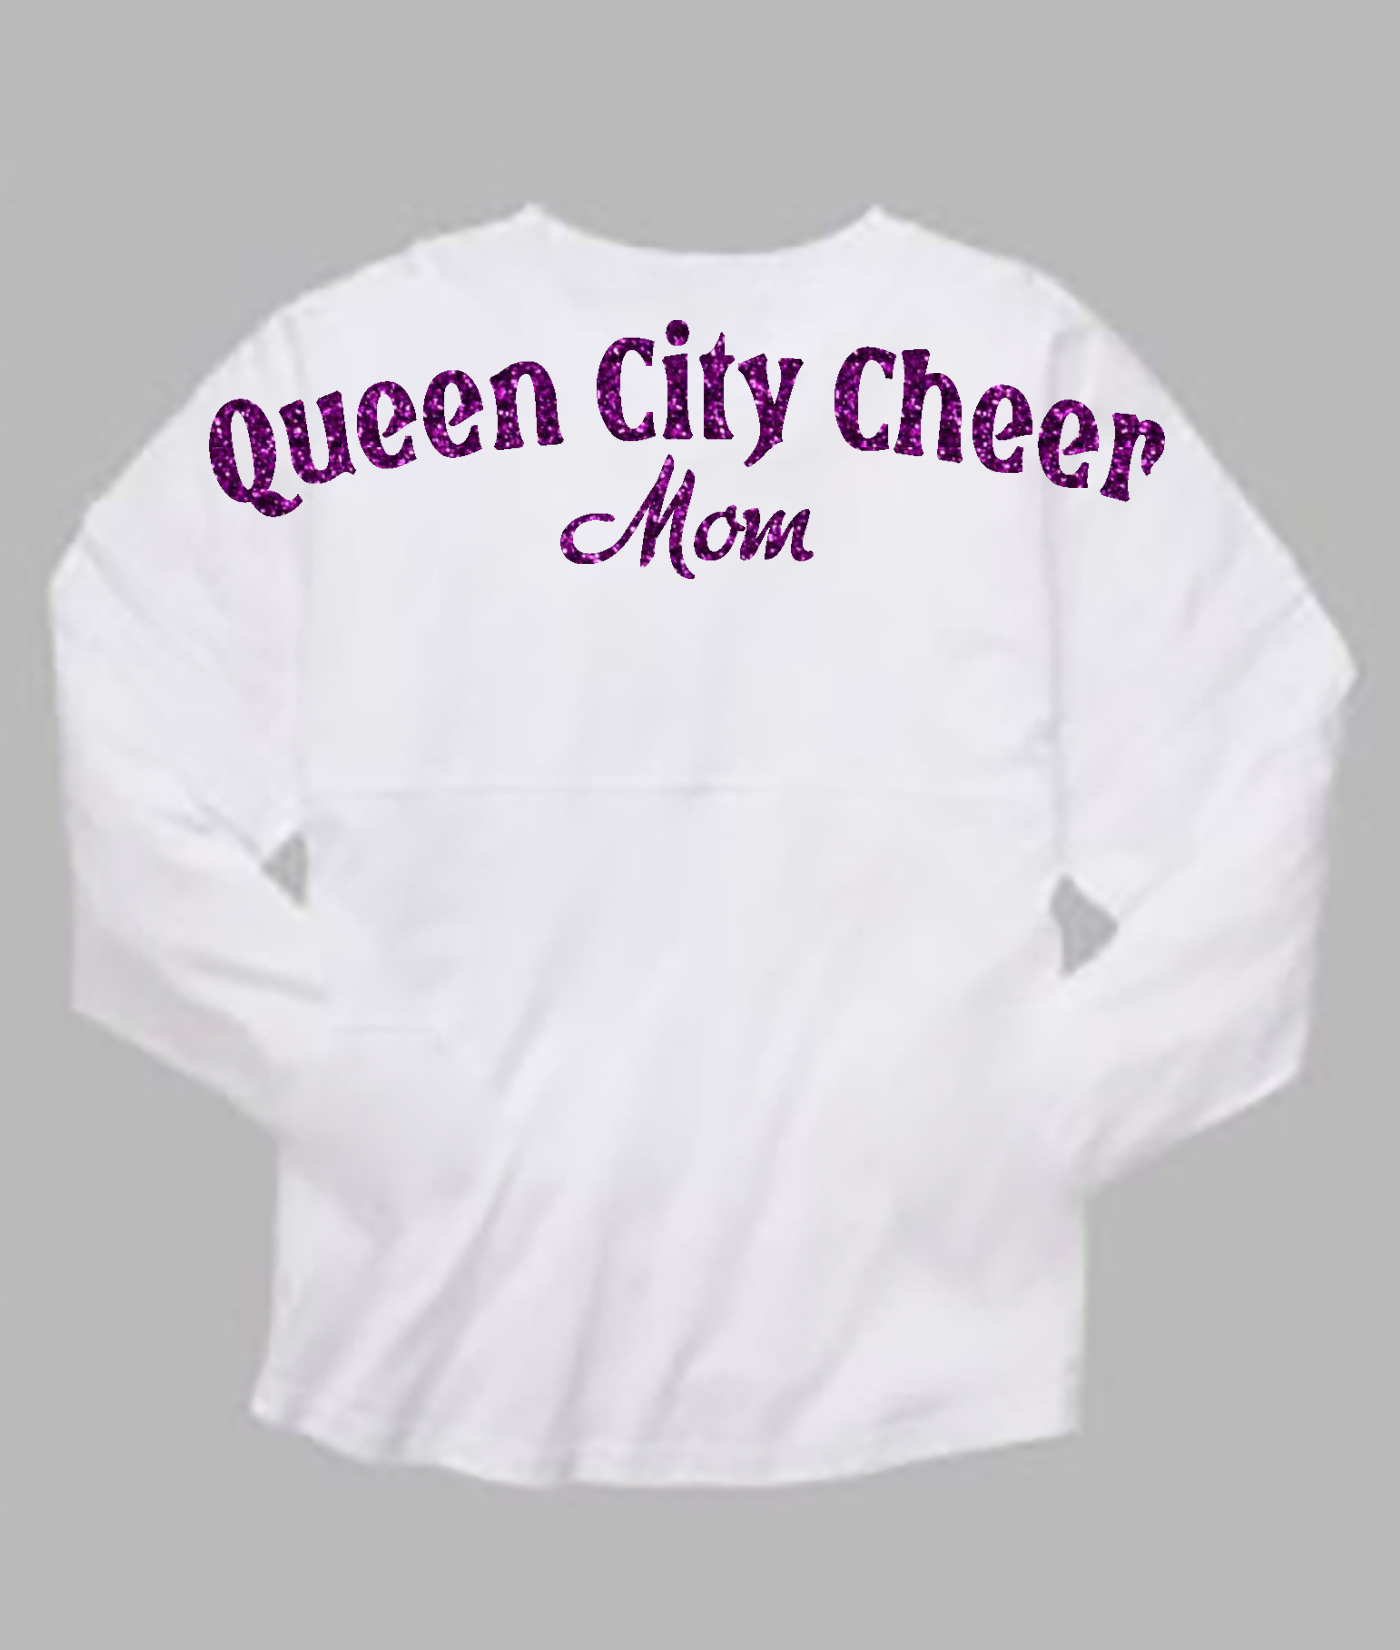 Queen City Cheer Mom White Pom Pom Jersey with Purple Glitter